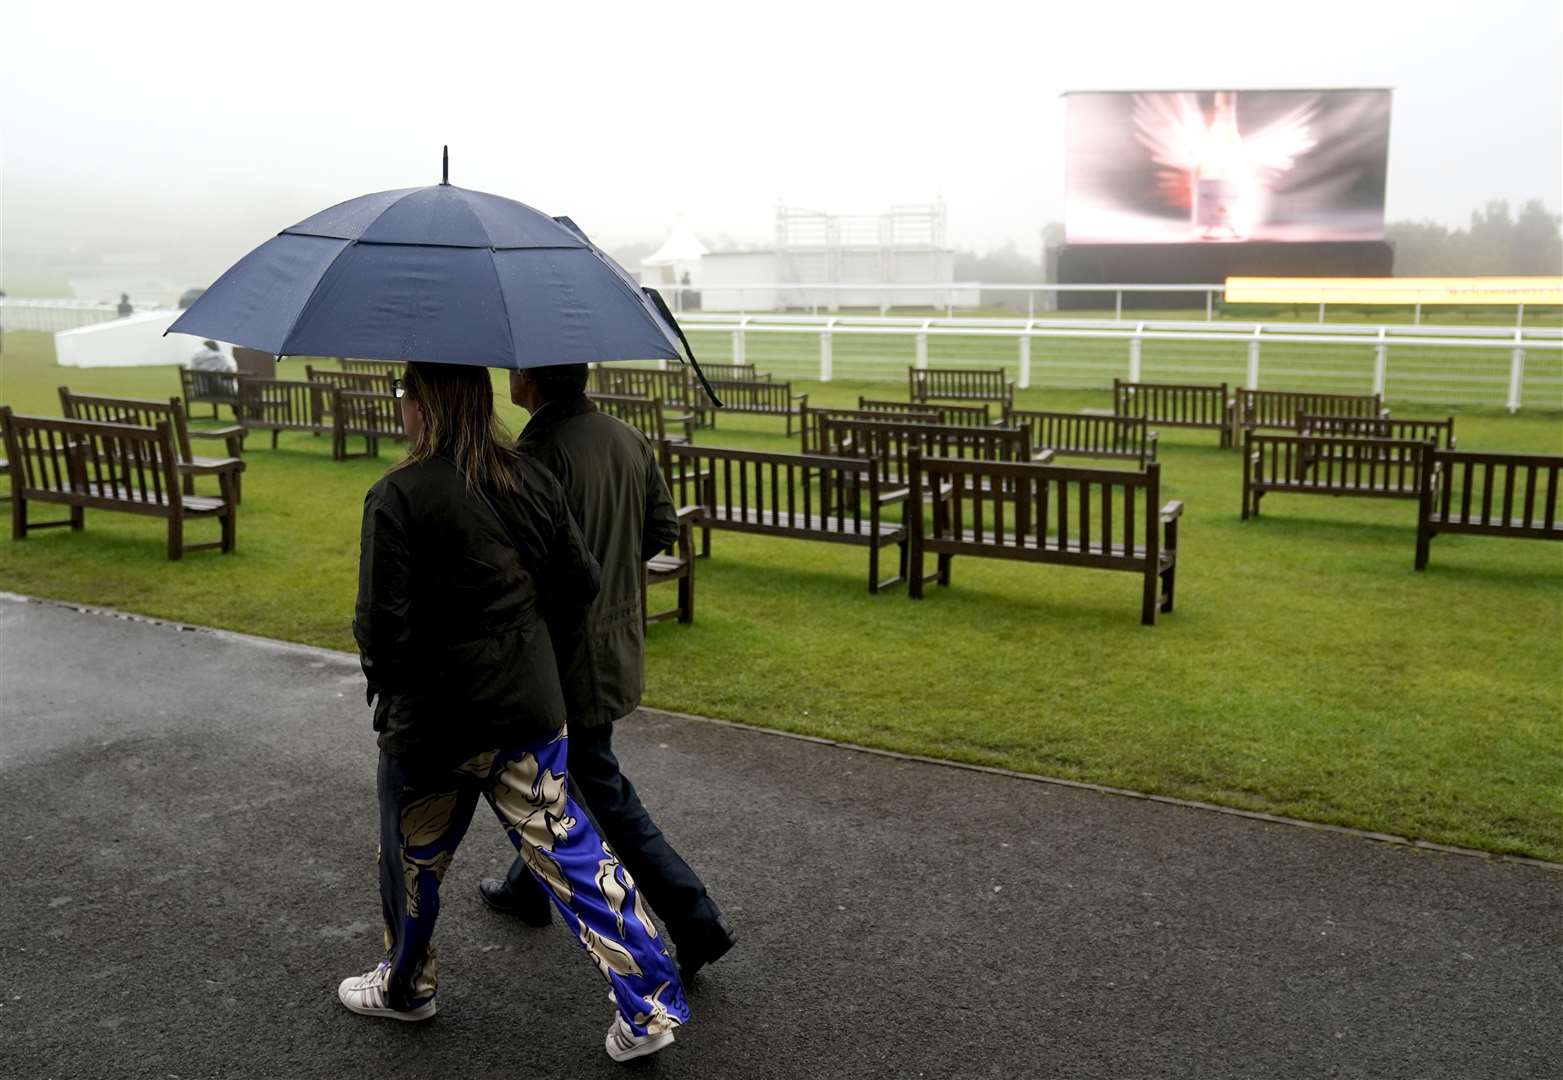 Racegoers shelter from the rain at Goodwood (Andrew Matthews/PA)